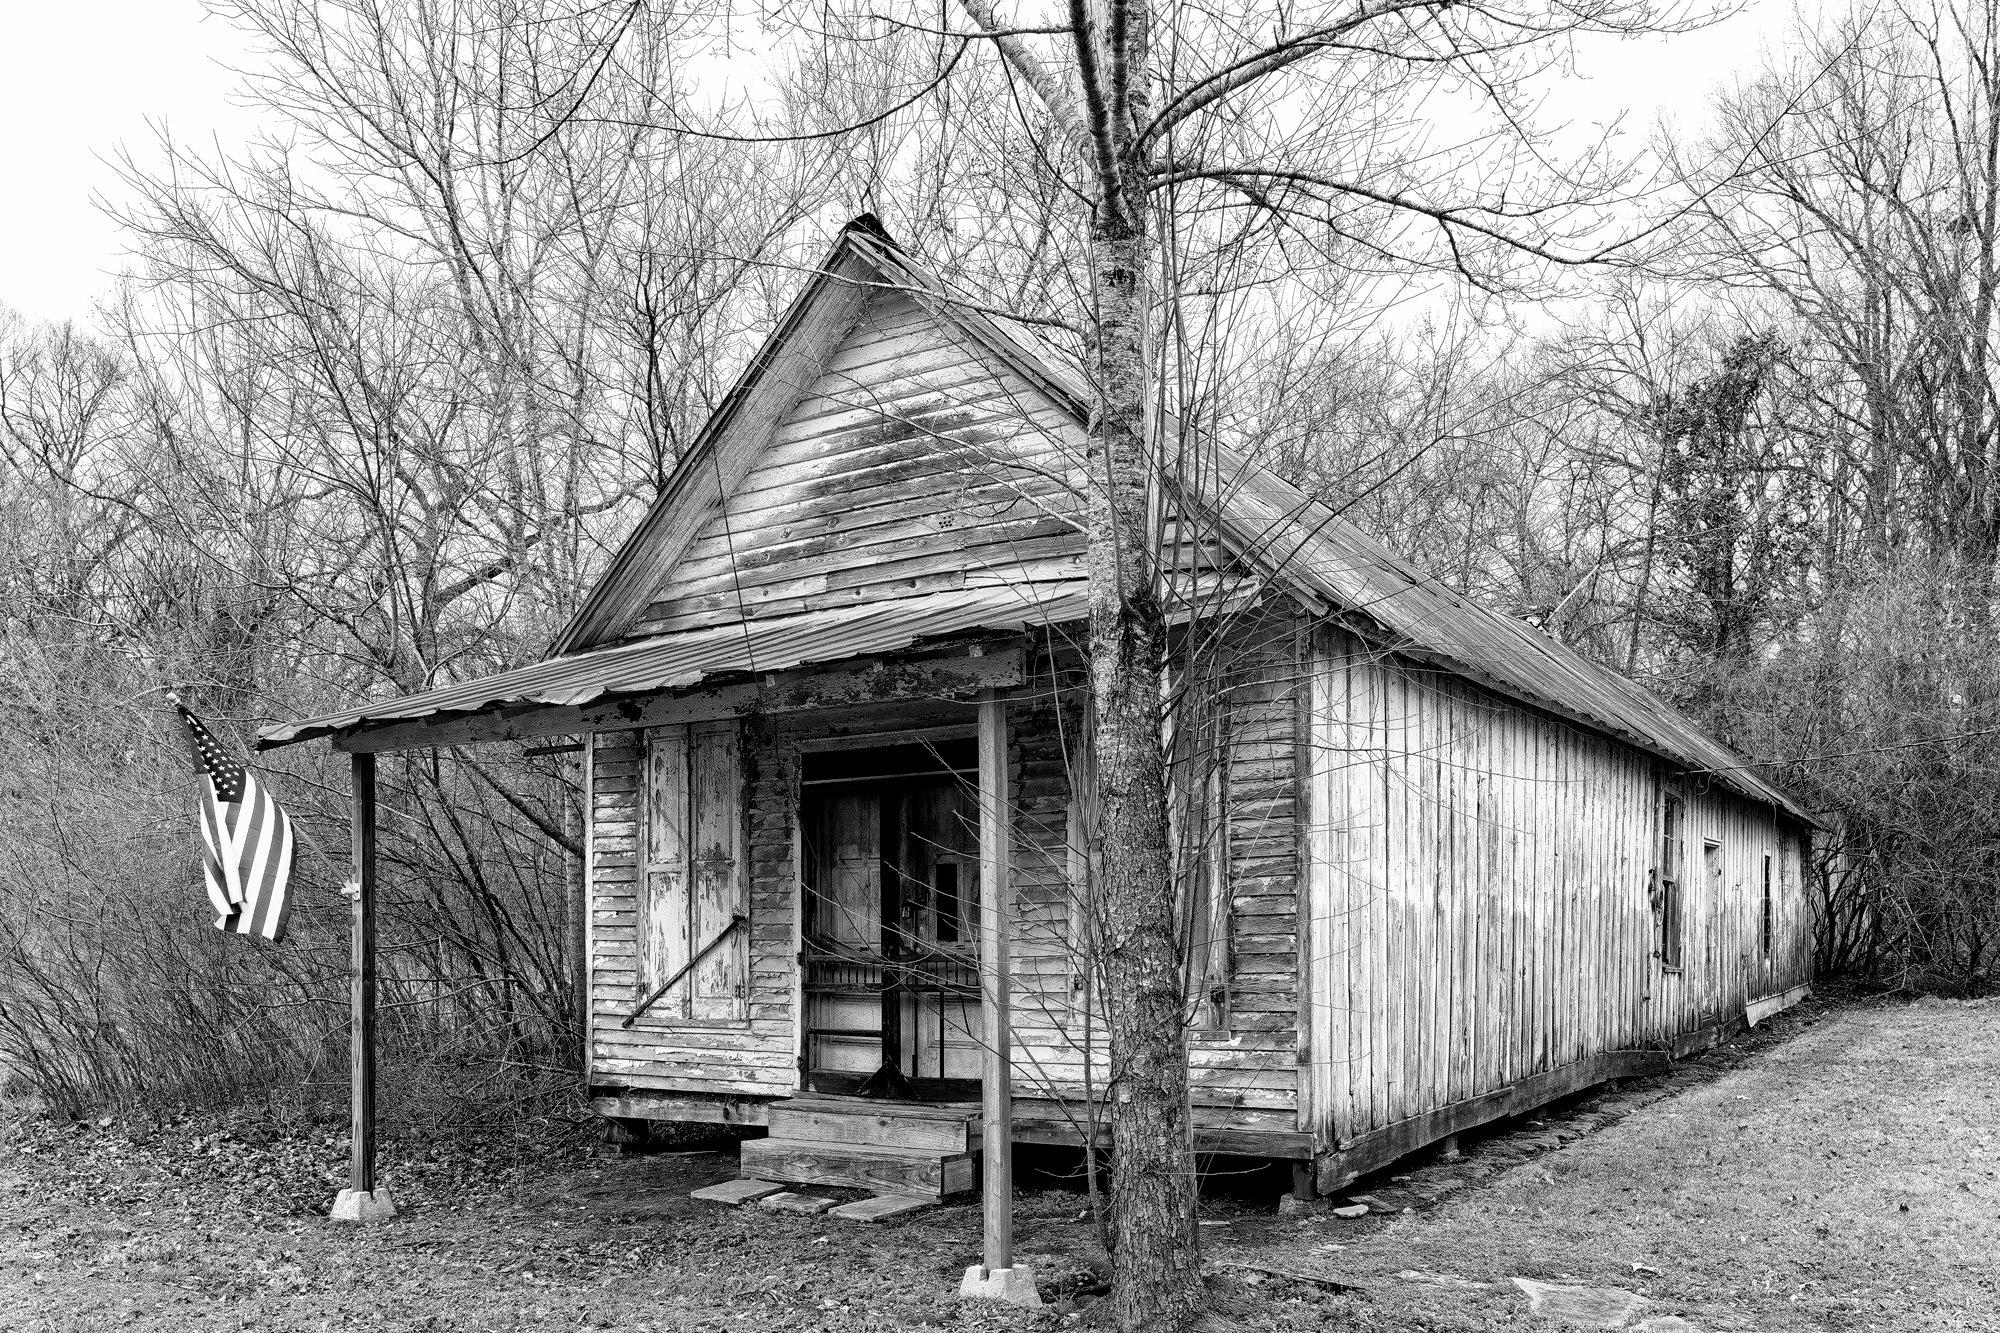 Abandoned Old Country Store: Black and White Photograph by Keith Dotson. Buy a fine art print.